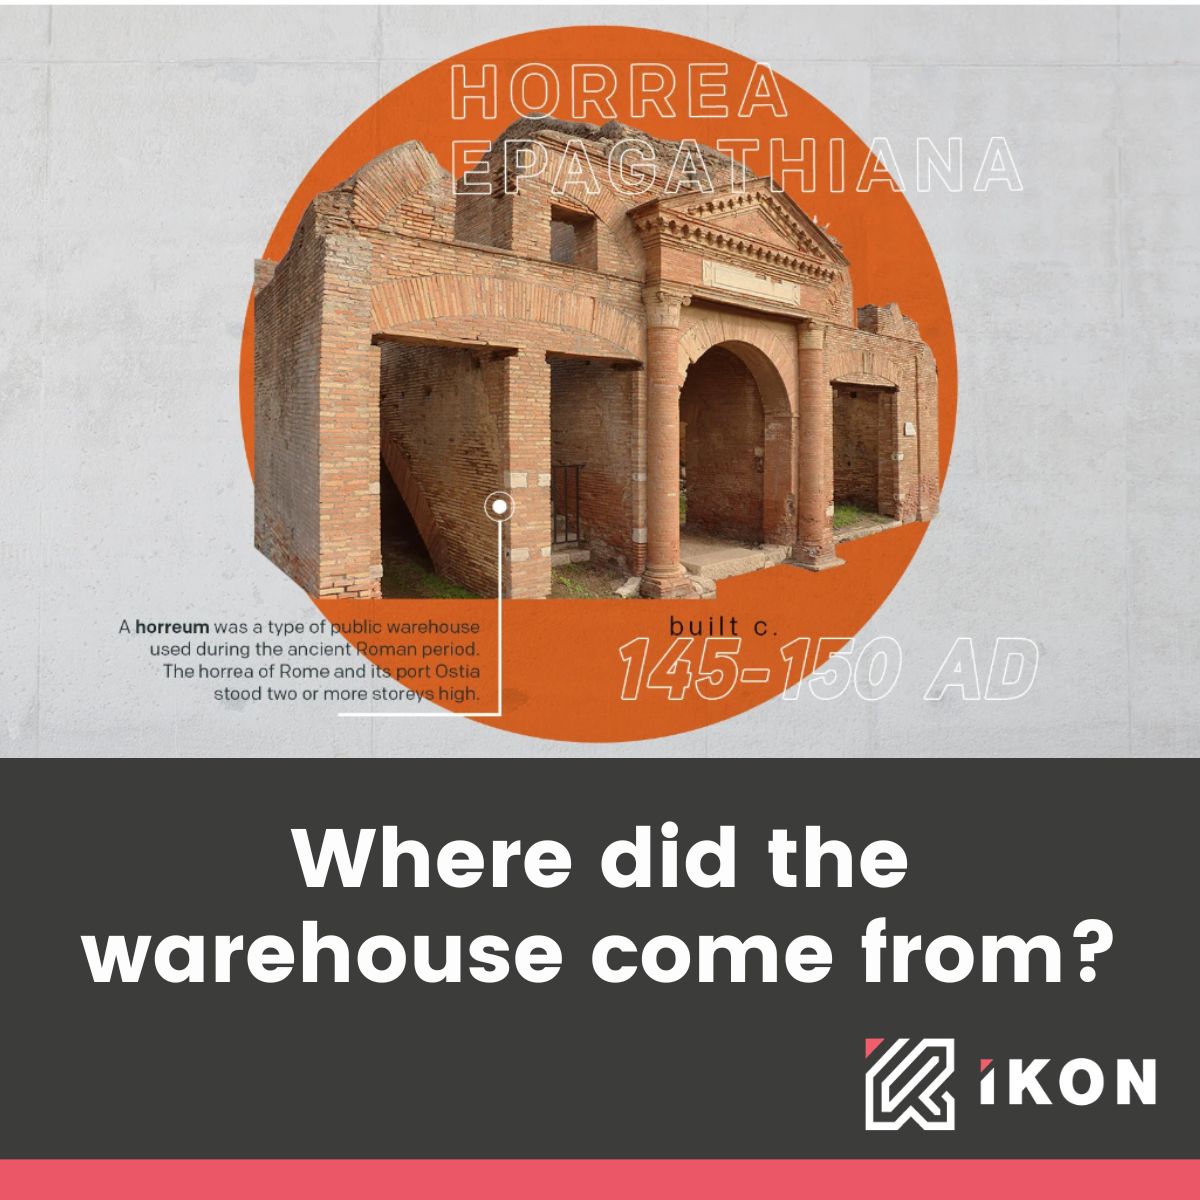 WHERE DID THE WAREHOUSE COME FROM?